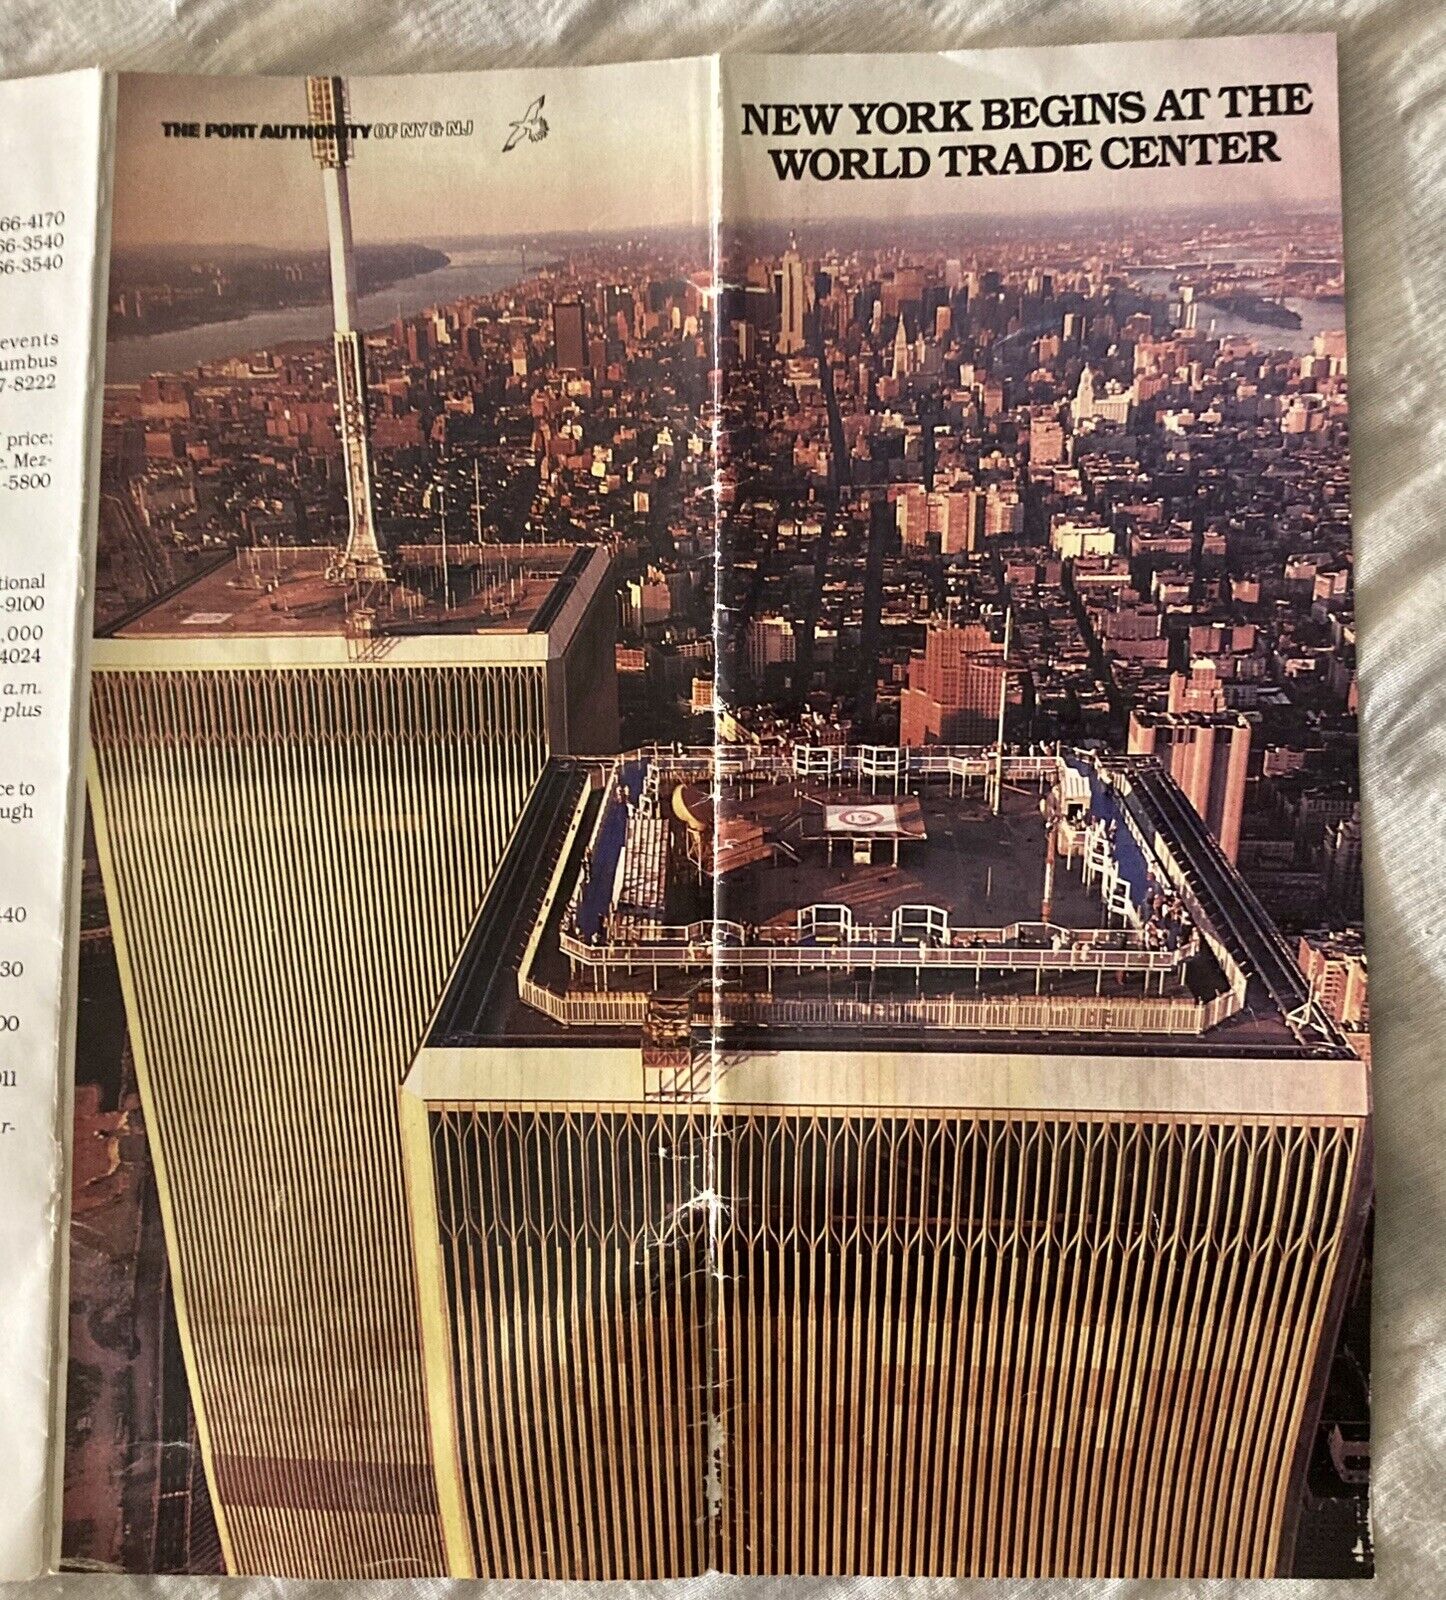 World Trade Center Twin Towers 80's New York Begins at the WTC Brochure Pre-9/11